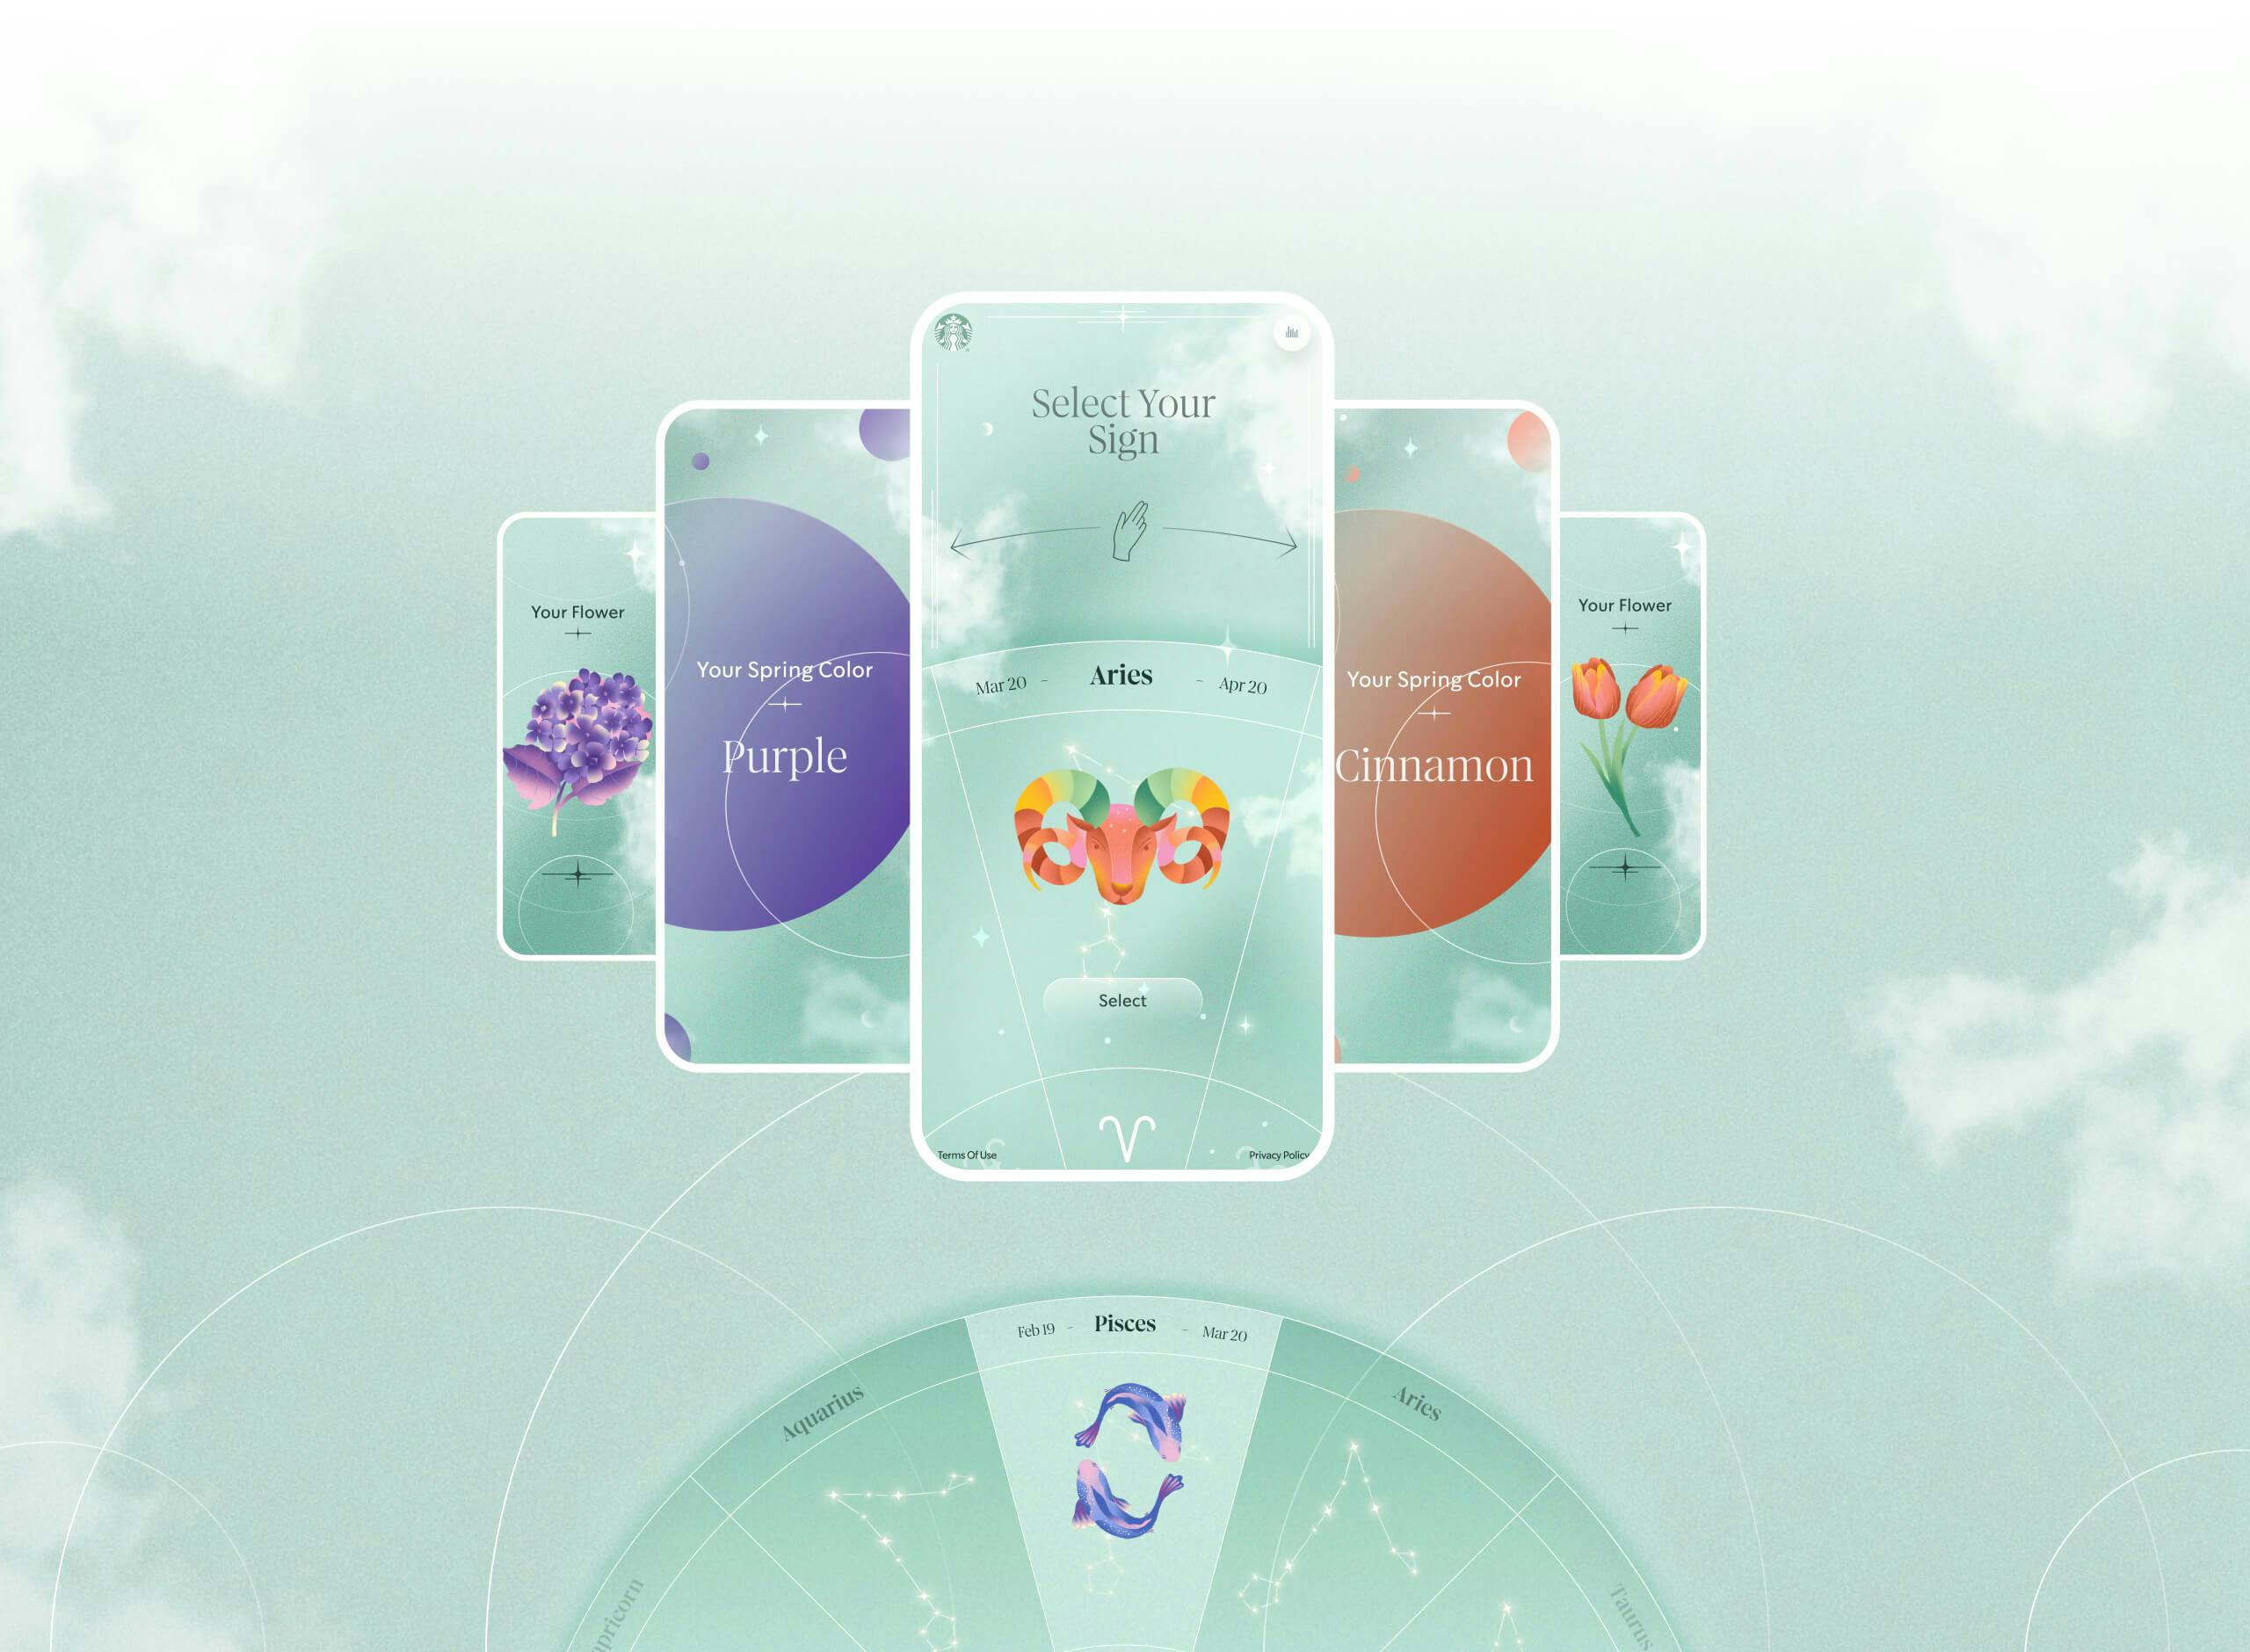 Starbucks horoscope case study featuring UI and UX done by Thinkingbox with illustrations that portray different Zodiac signs. 